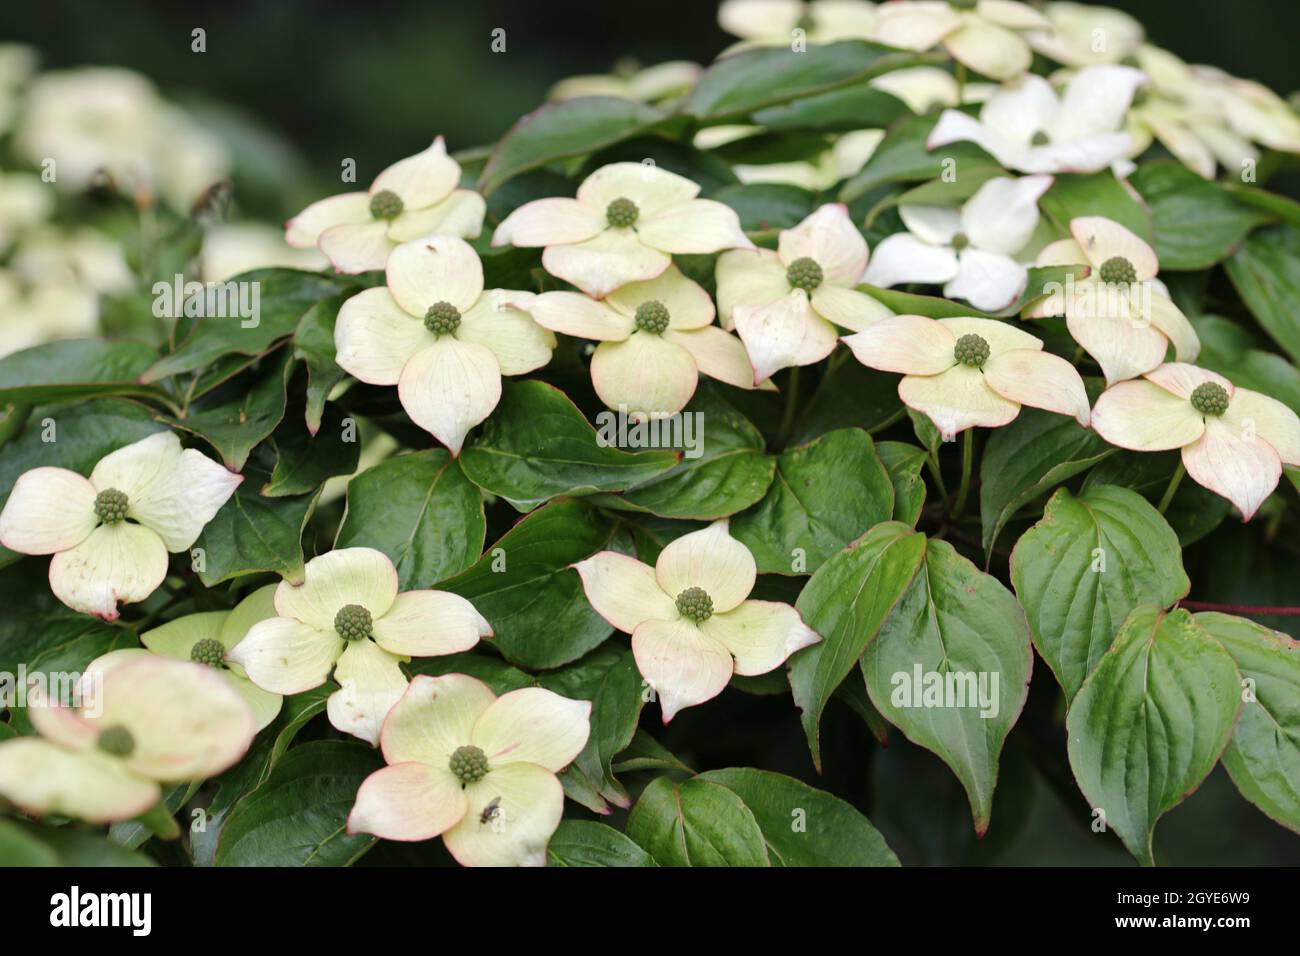 Flowering dogwood, Cornus kousa variety unknown, with large white bracts tinged with pink surrounding the inconspicuous central flowers with a backgro Stock Photo